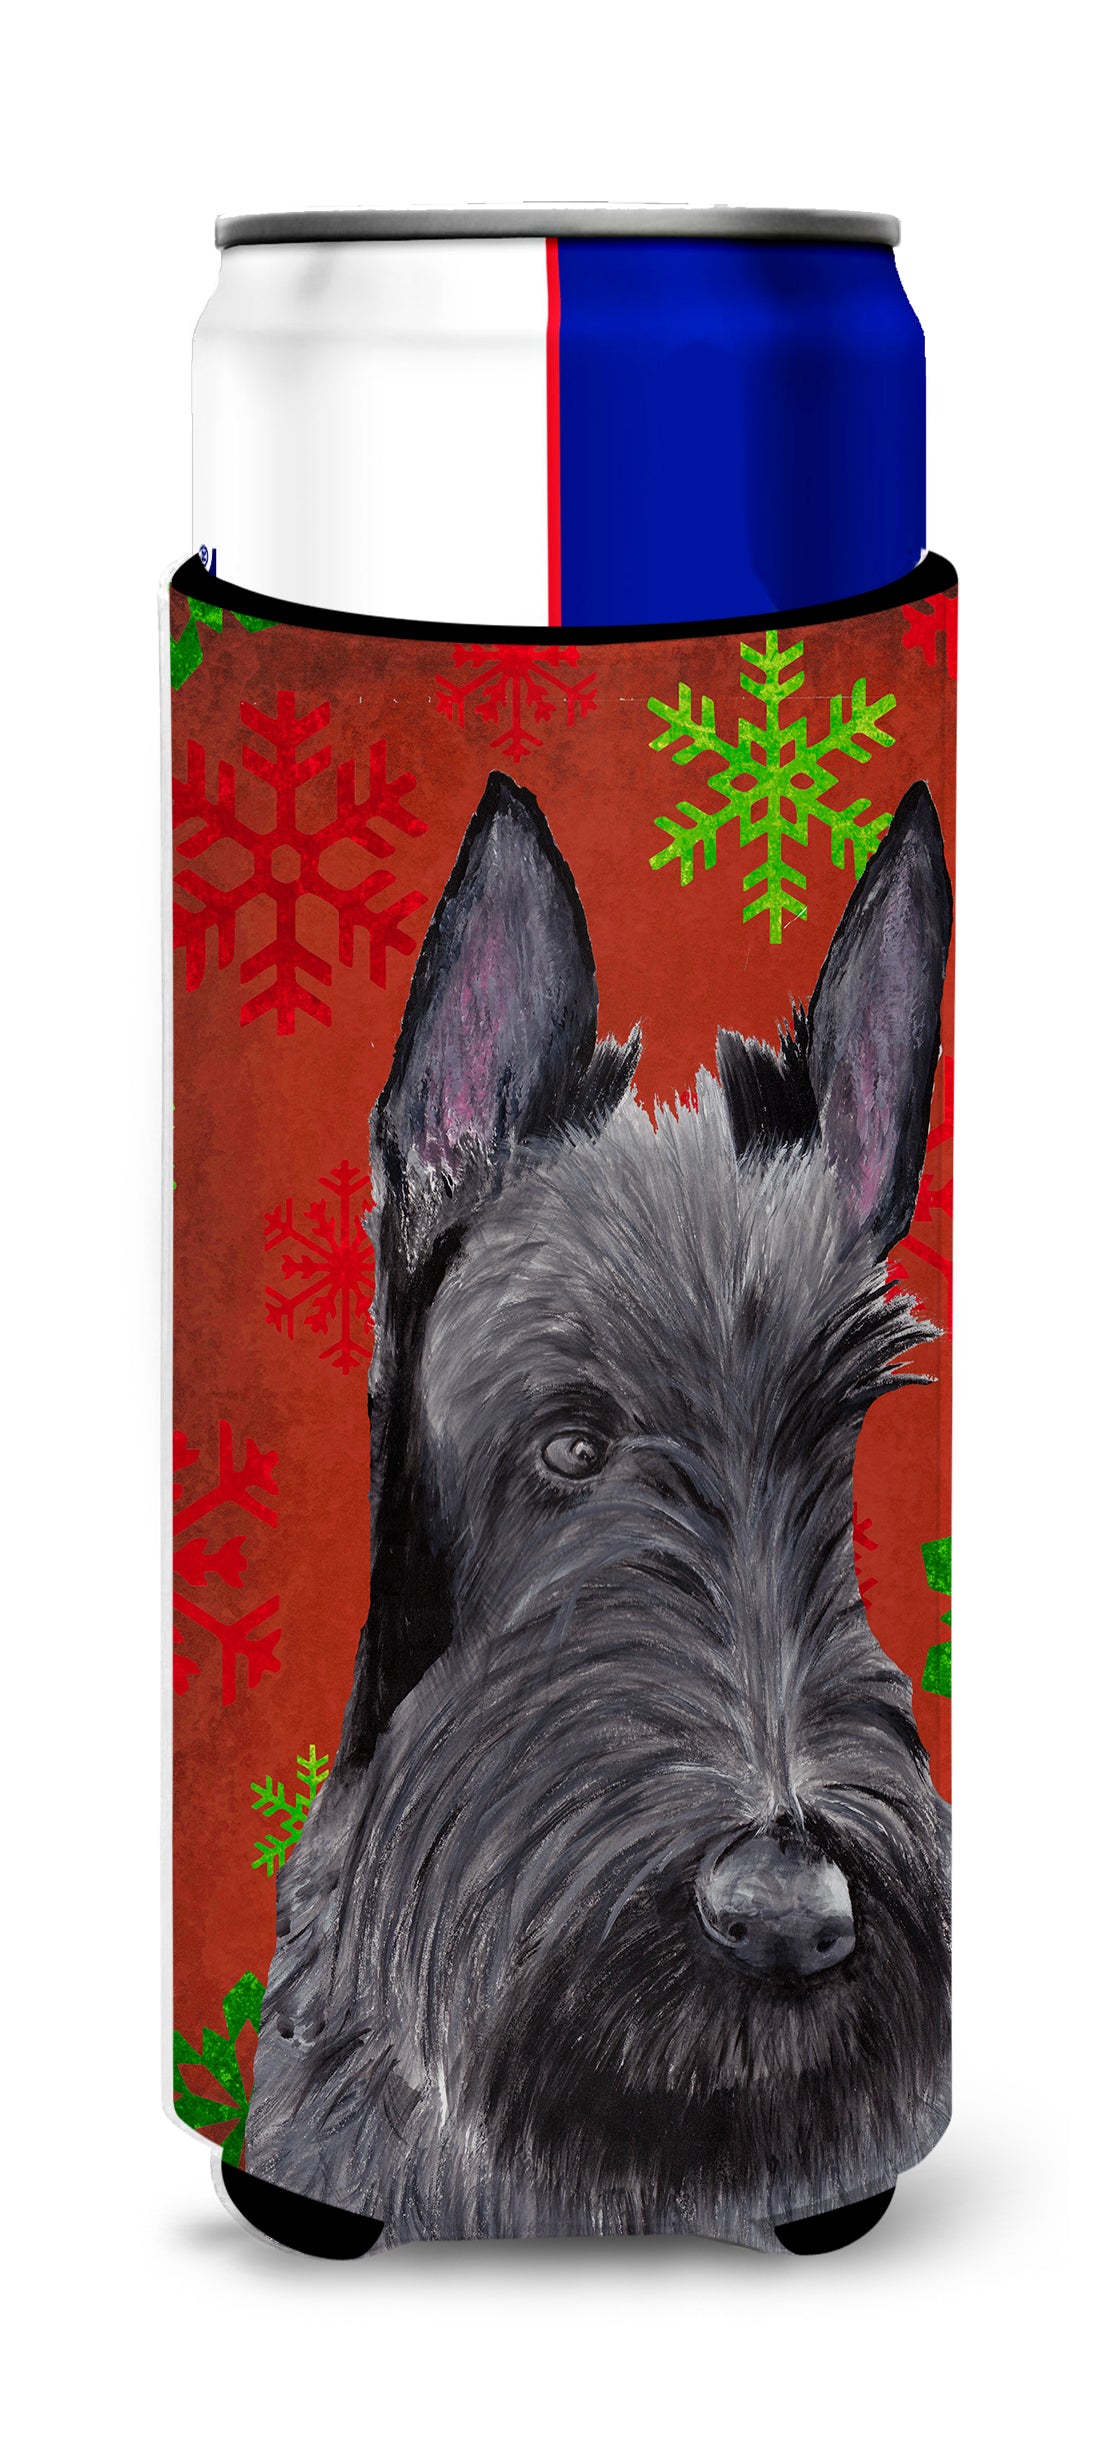 Scottish Terrier Red and Green Snowflakes Holiday Christmas Ultra Beverage Insulators for slim cans SC9426MUK.